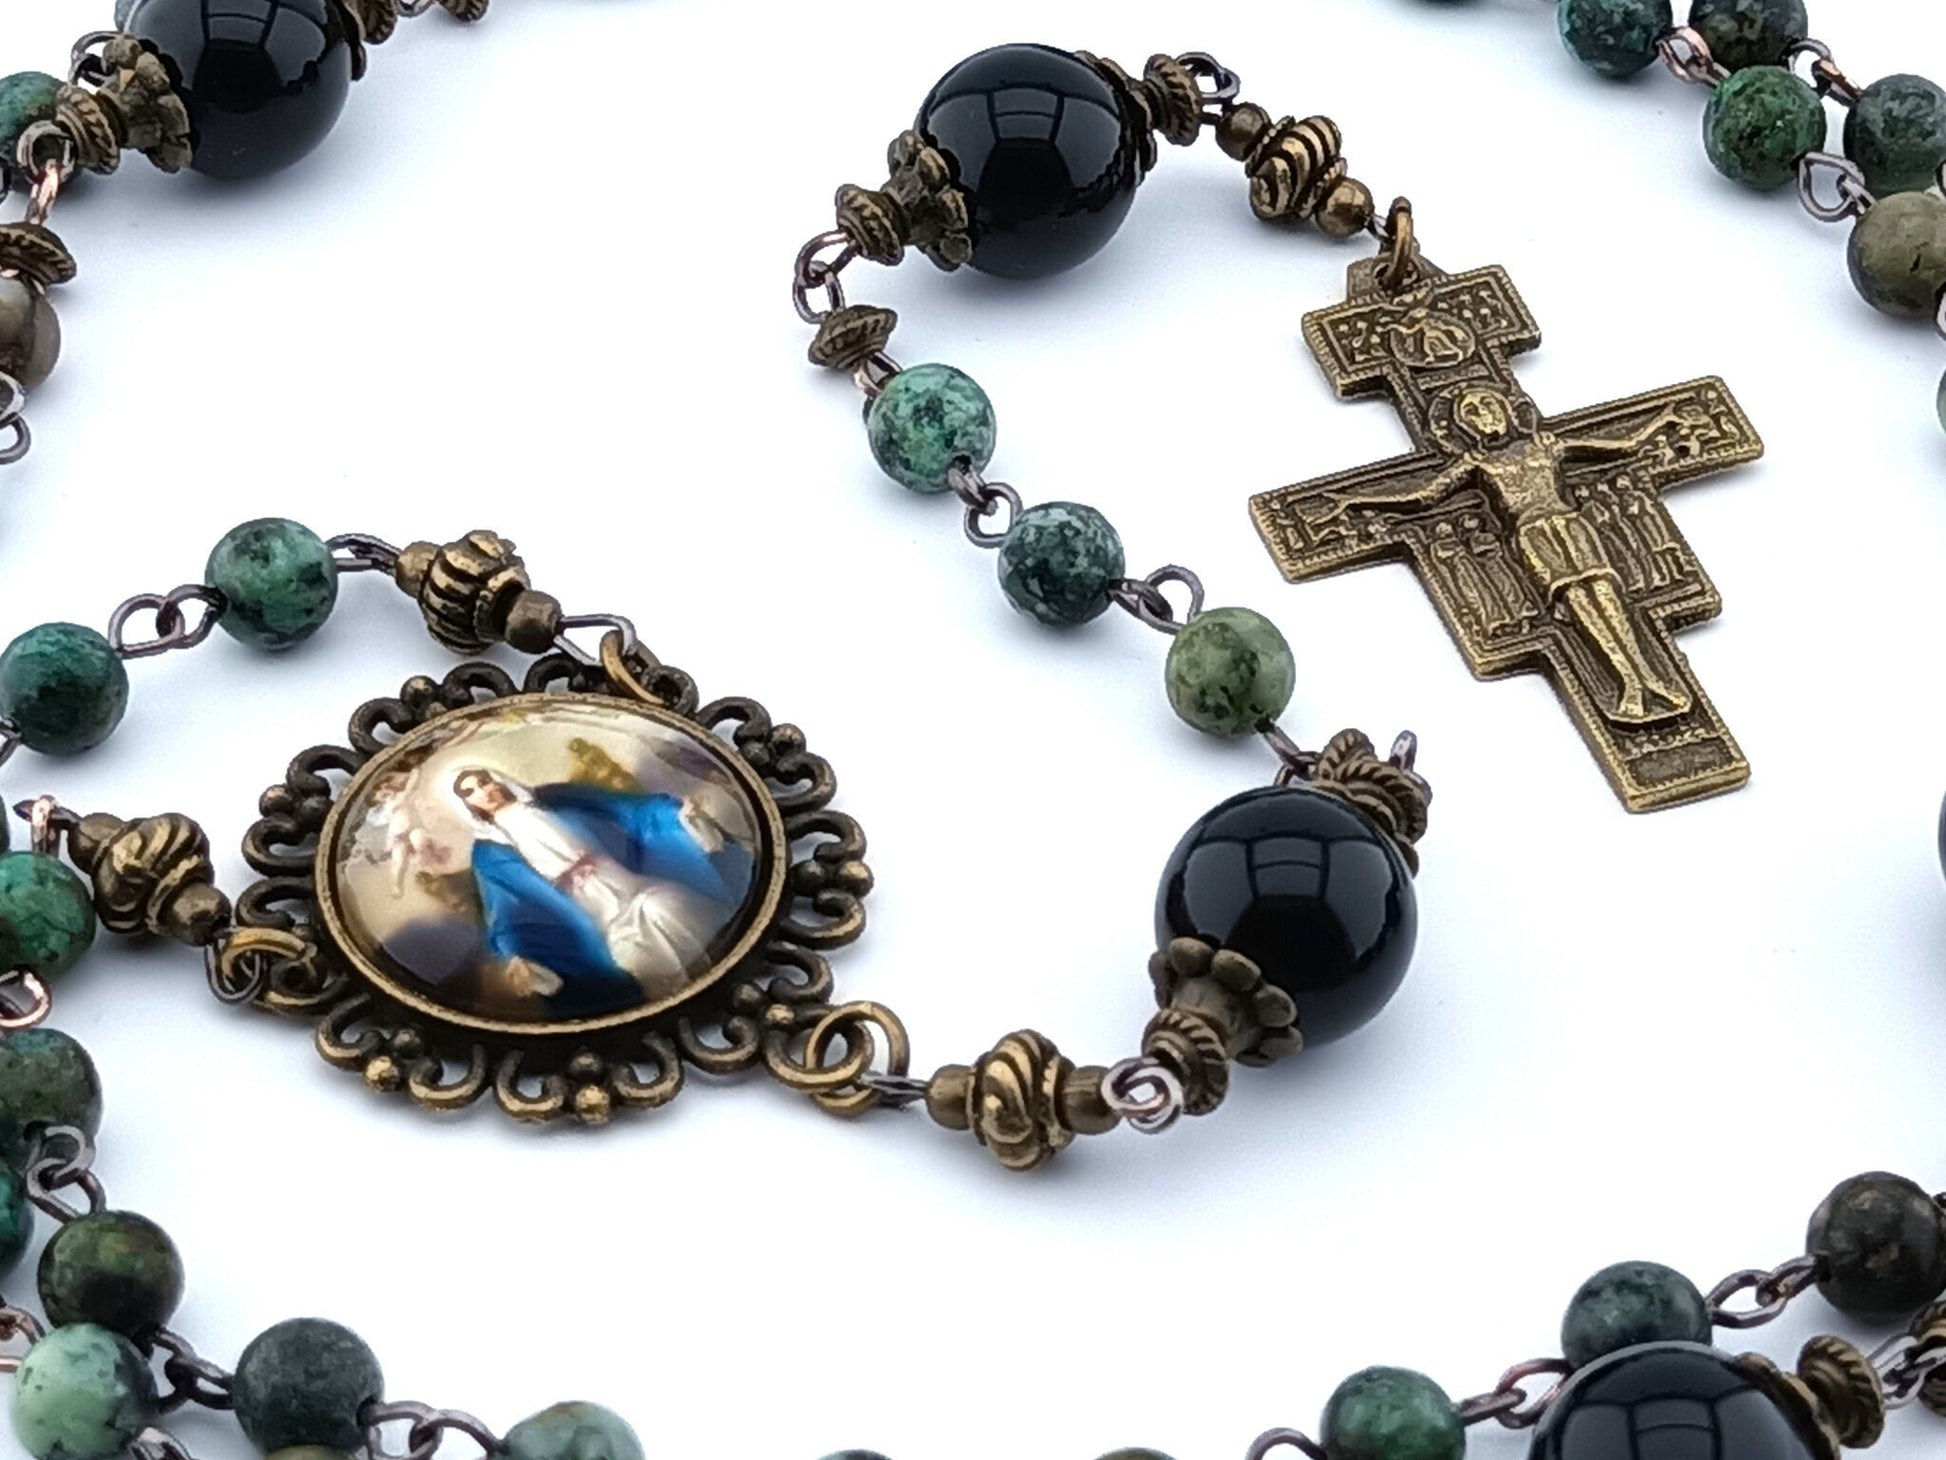 Our Lady Queen of Heaven unique rosary beads with green jasper gemstone beads, onyx pater beads, bronze Saint Francis of Assisi crucifix and picture centre medal.